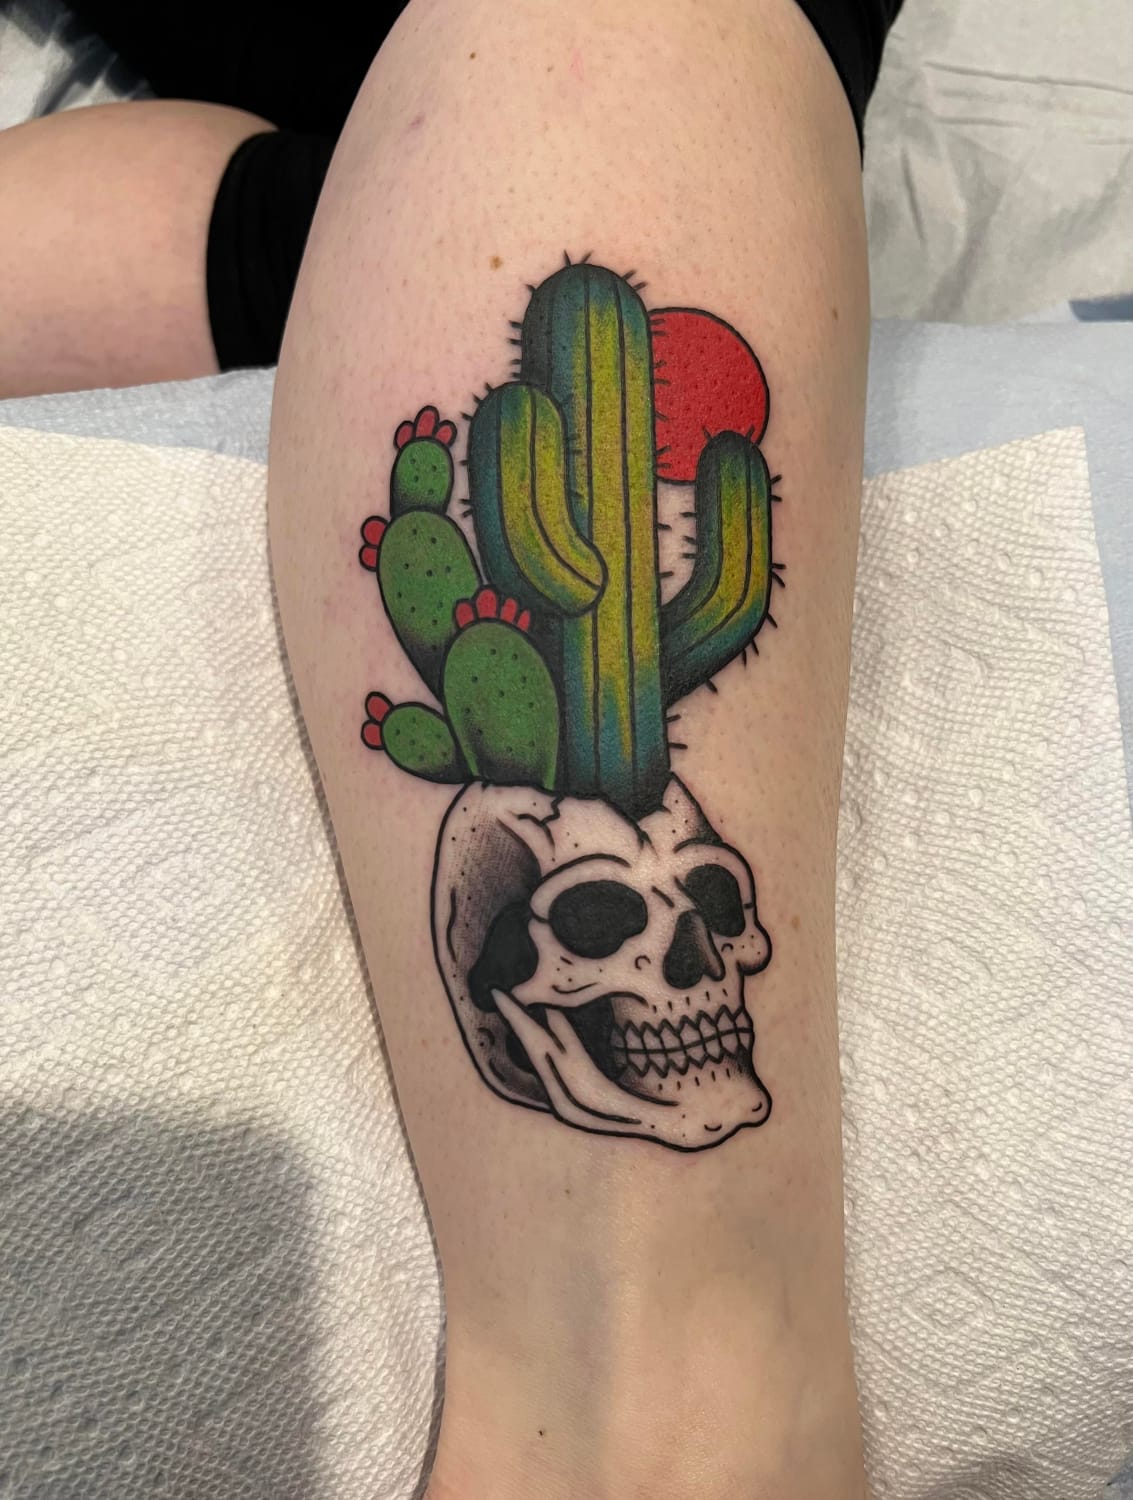 My new ink done while visiting Tucson, Arizona at Sanctity Tattoo by Tommy Nash